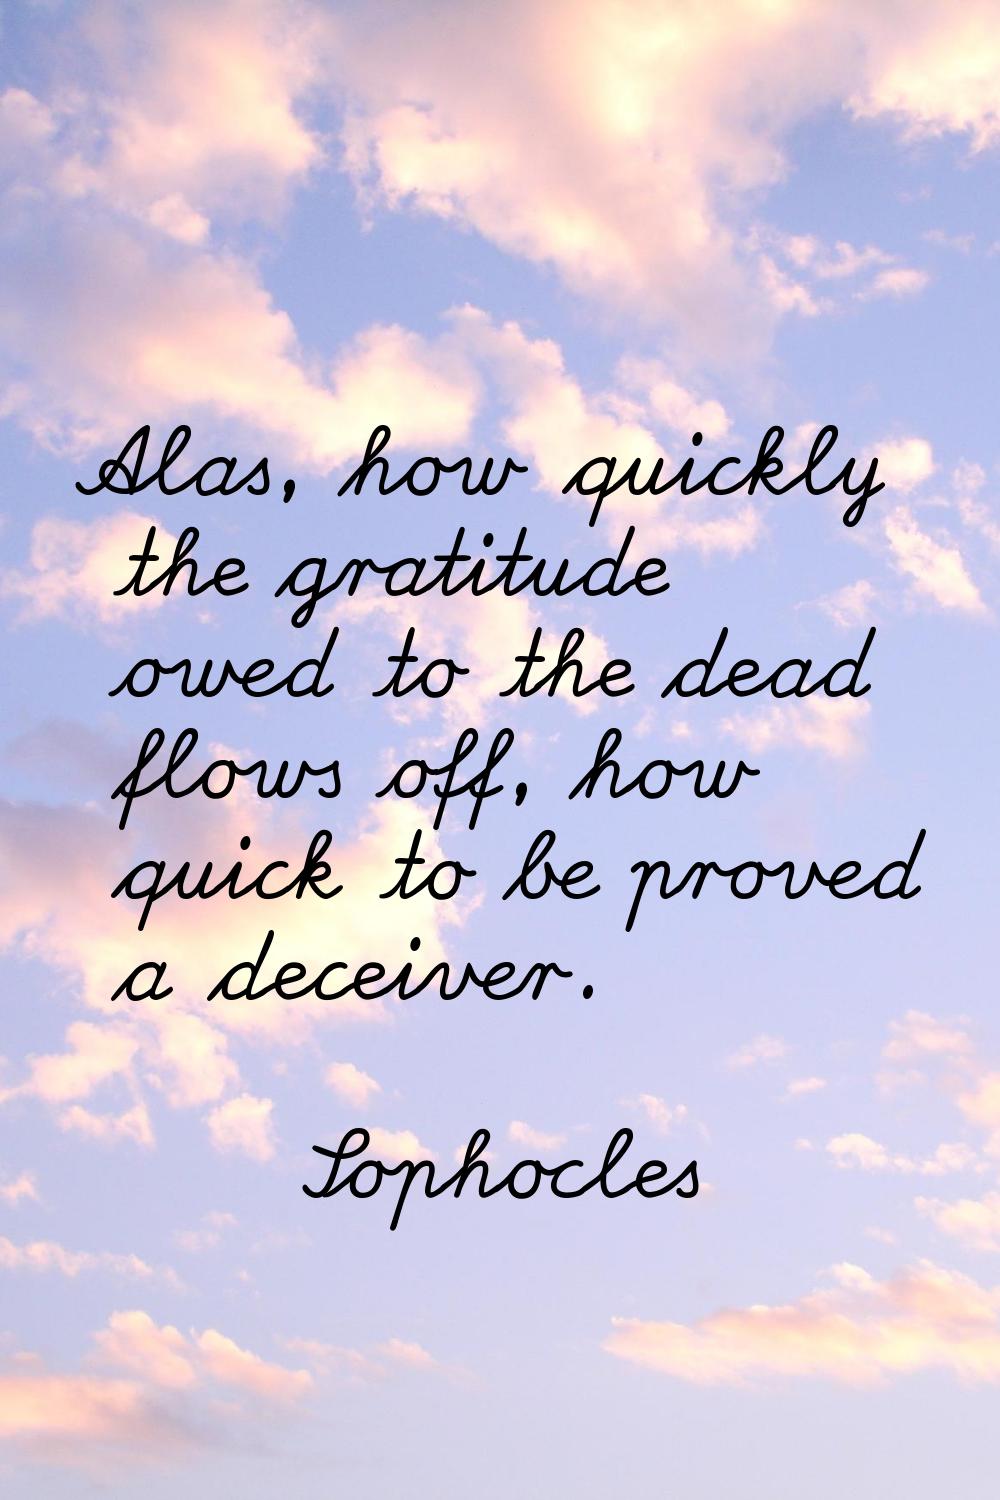 Alas, how quickly the gratitude owed to the dead flows off, how quick to be proved a deceiver.